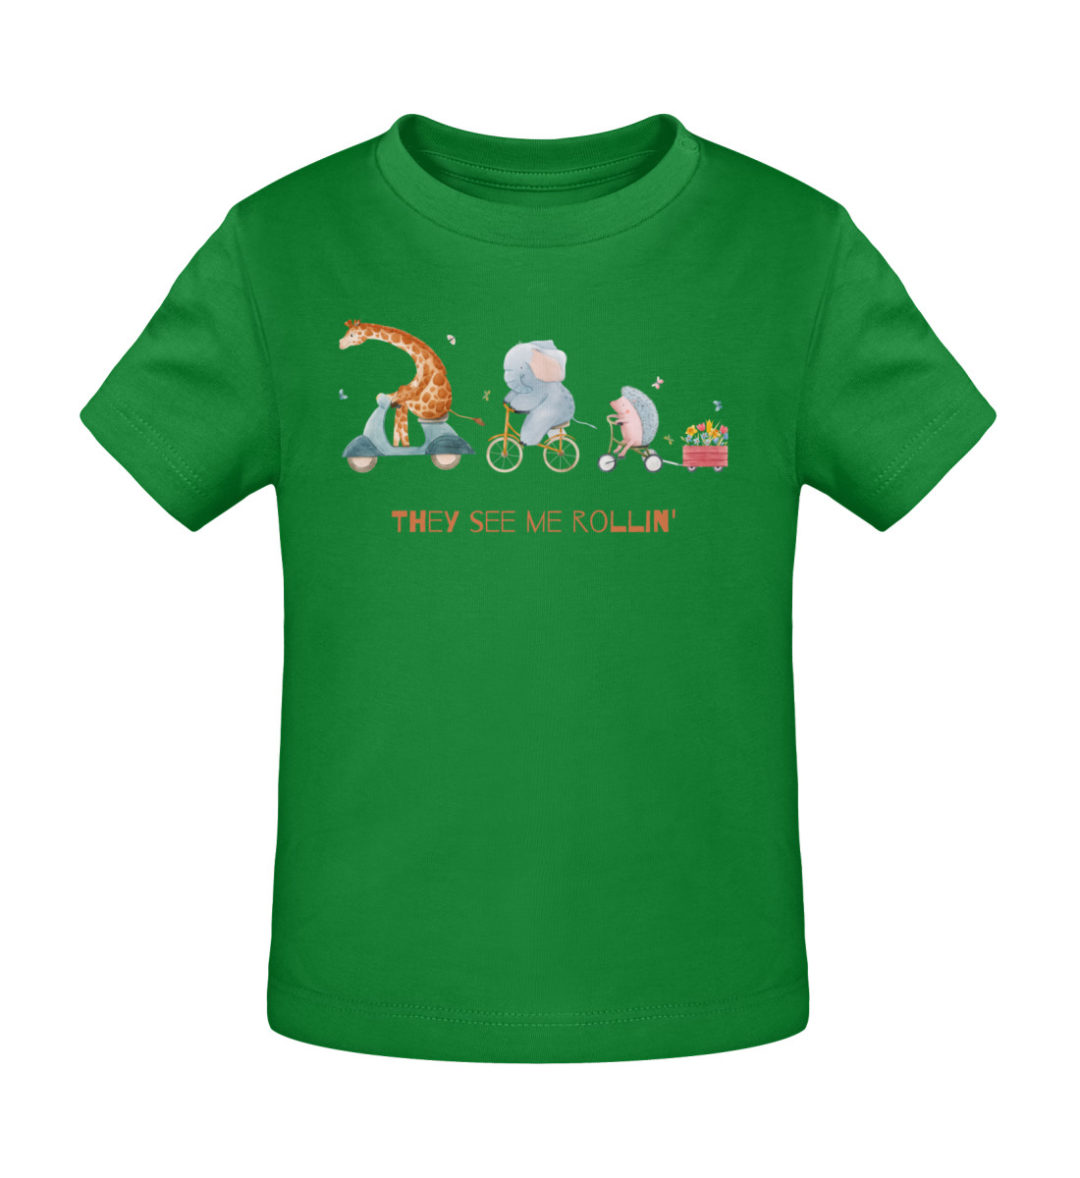 They see me rollin- - Baby Creator T-Shirt ST/ST-6879